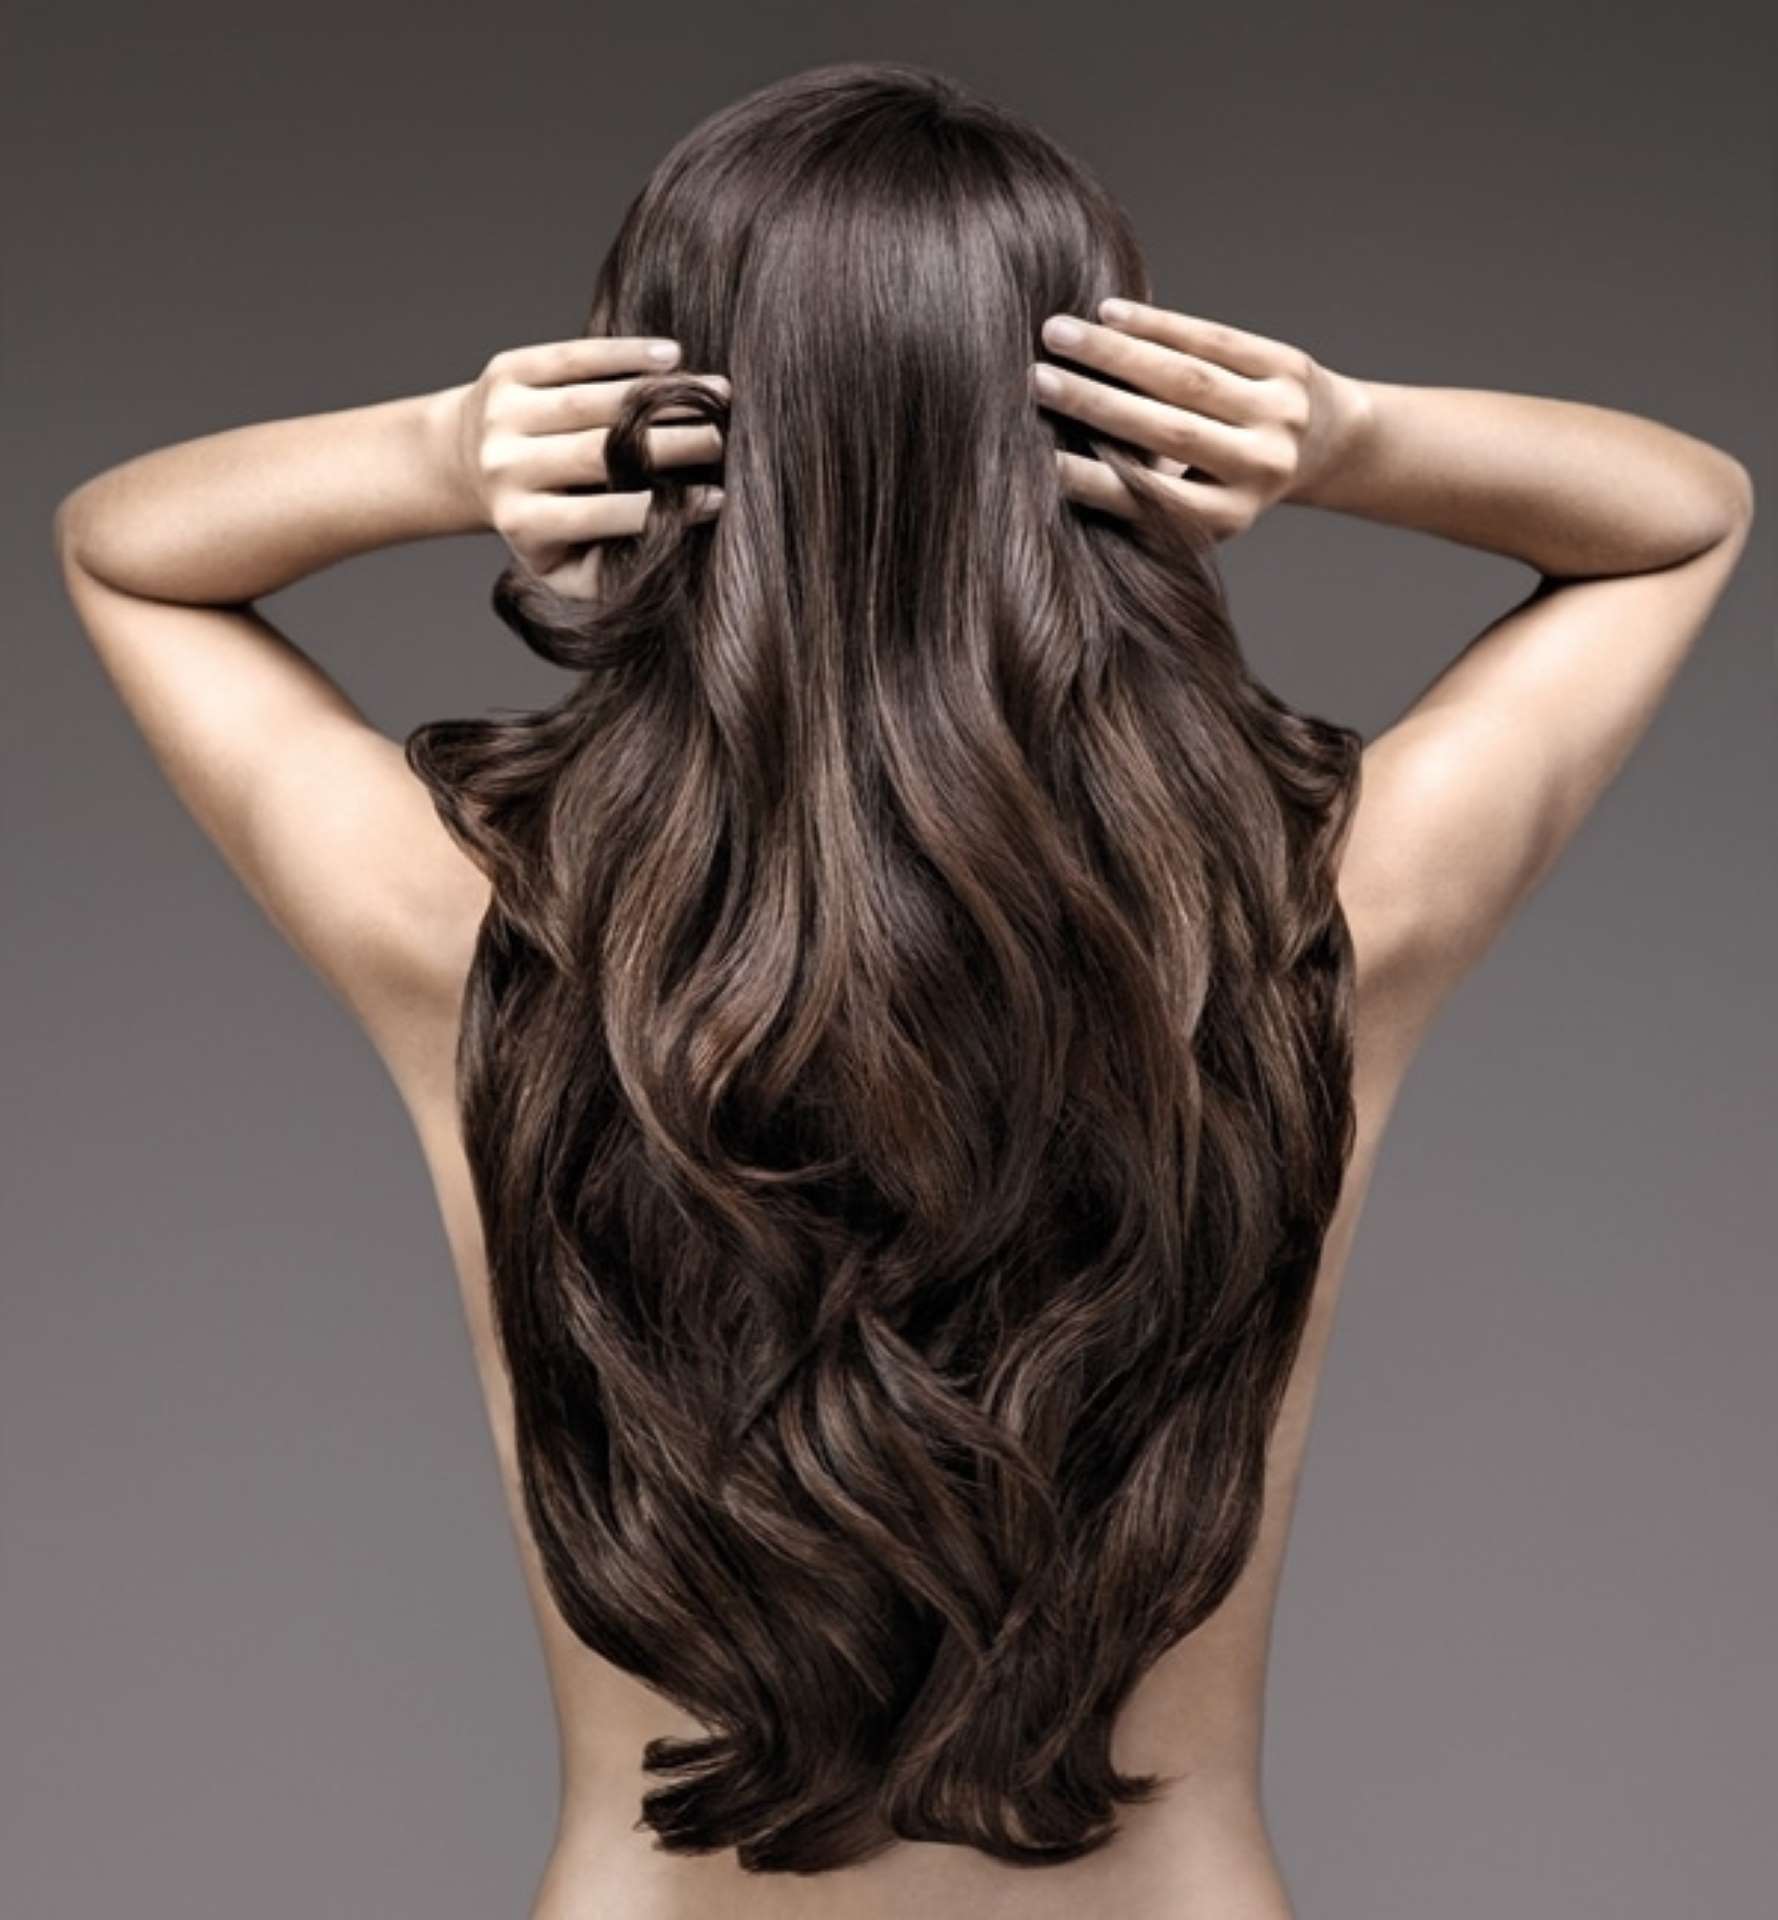 Woman from behind with long wavy dark hair